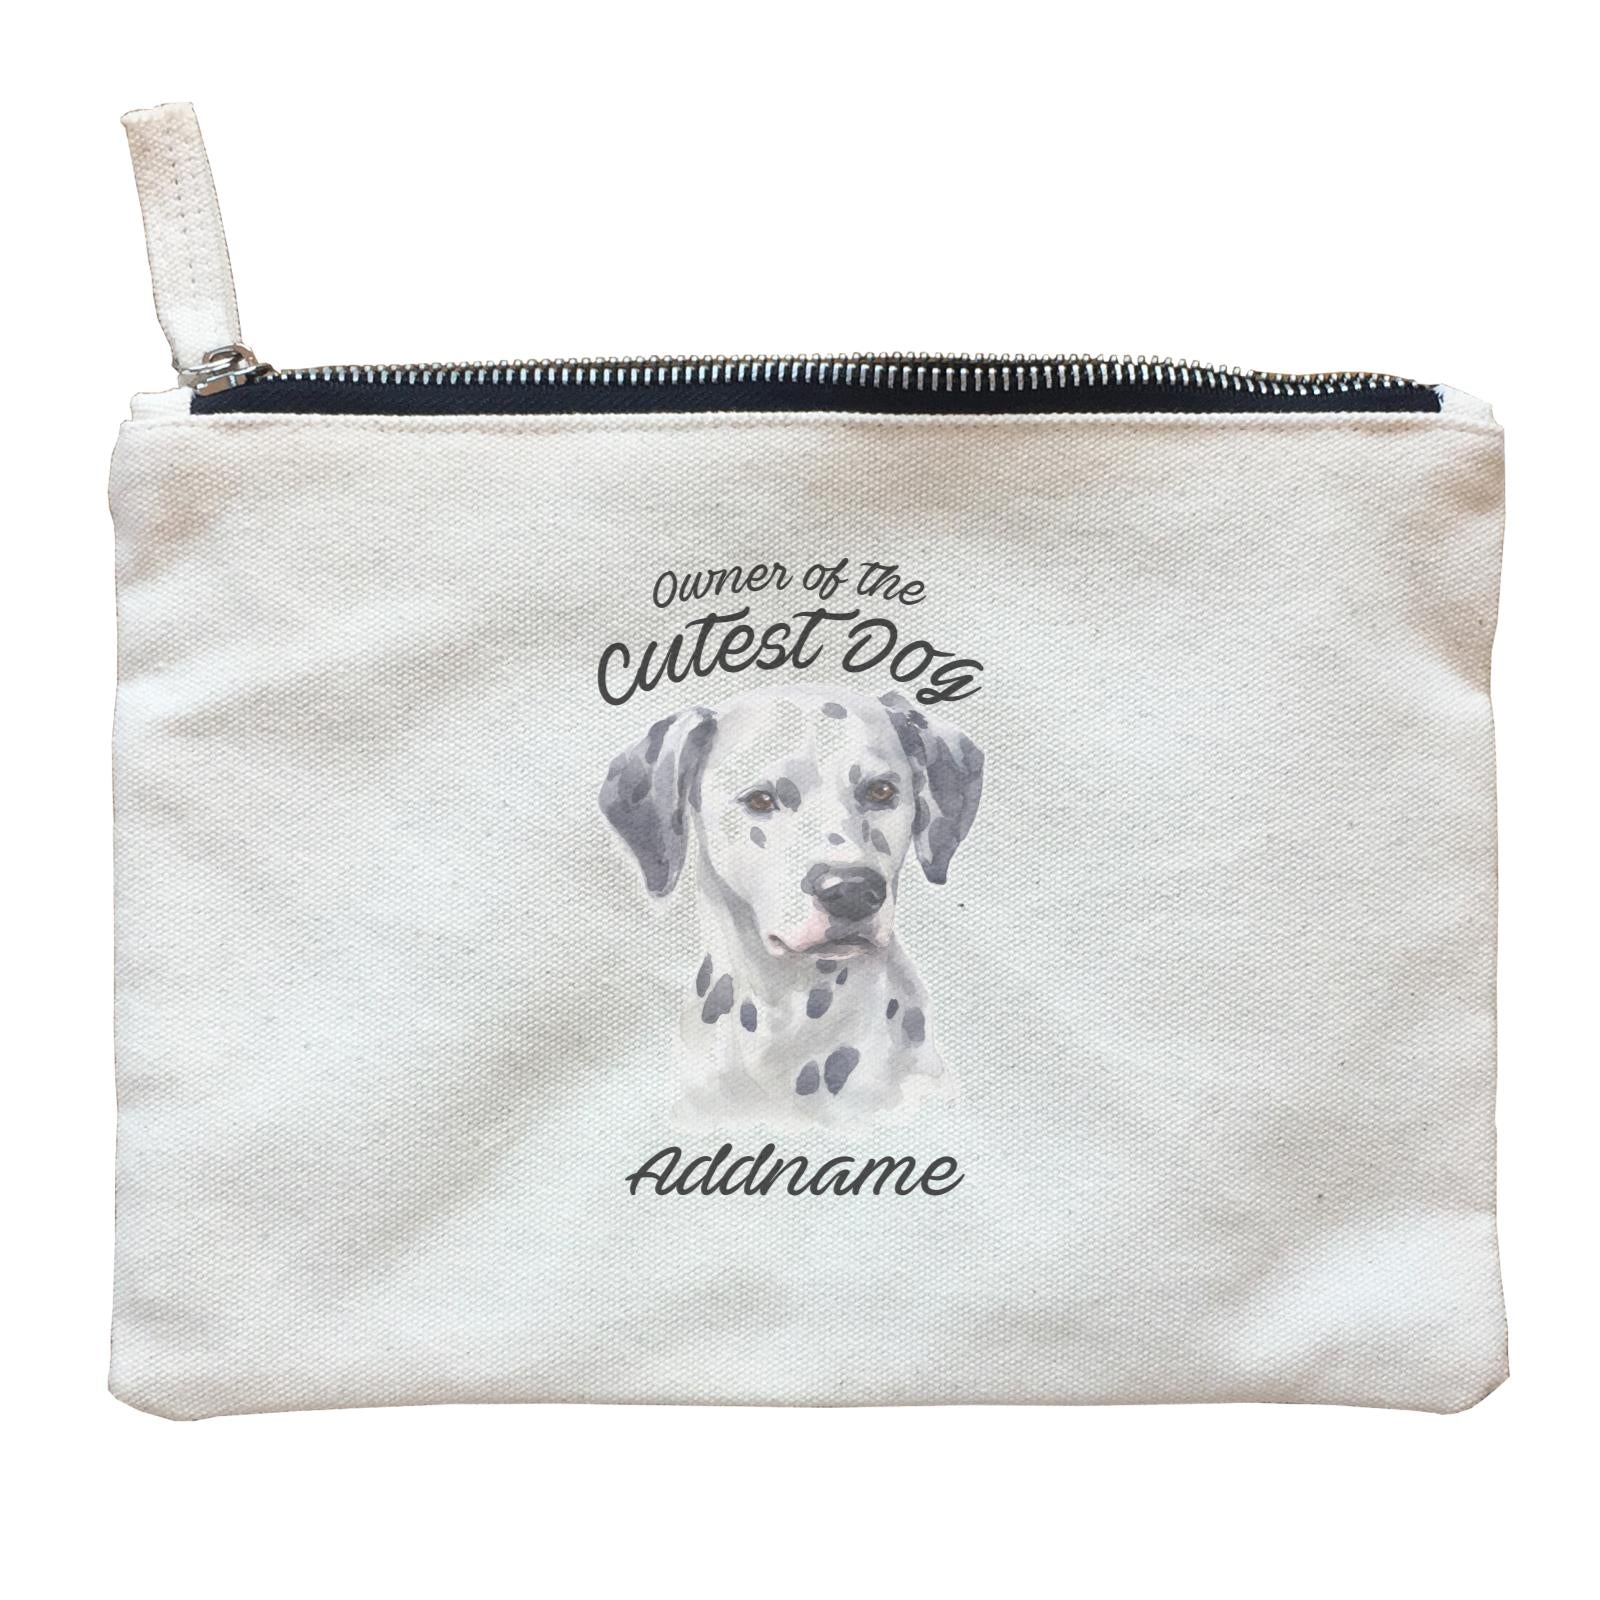 Watercolor Dog Owner Of The Cutest Dog Dalmatian Addname Zipper Pouch